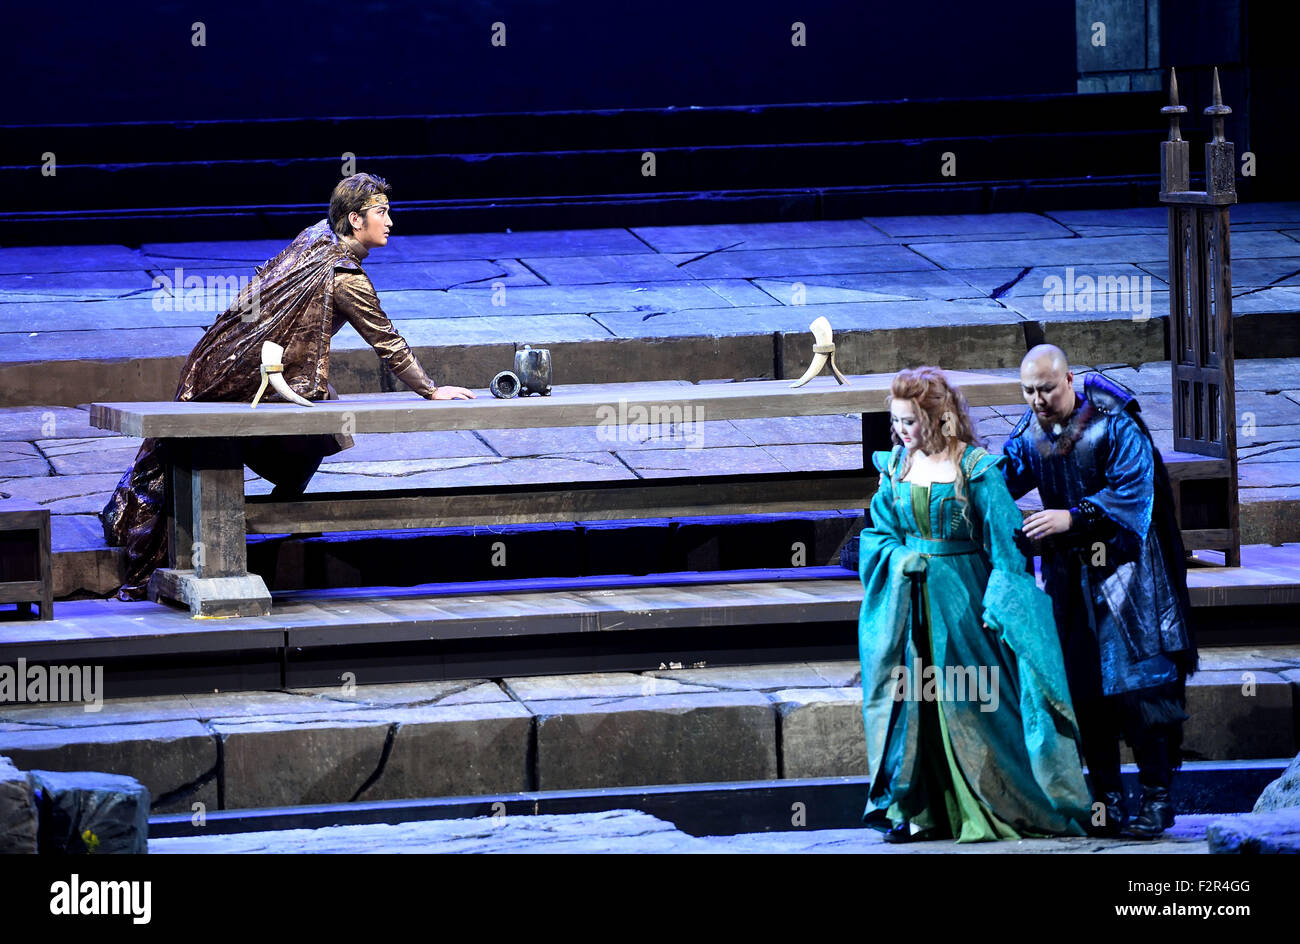 Beijing, China. 22nd Sep, 2015. Actors from China National Opera House perform in the opera 'Twilight of the Gods', the last in Richard Wagner's cycle of four operas titled 'the Ring of the Nibelung', at the National Center for the Performing Art in Beijing, capital of China, Sept. 22, 2015. © Jin Liangkuai/Xinhua/Alamy Live News Stock Photo